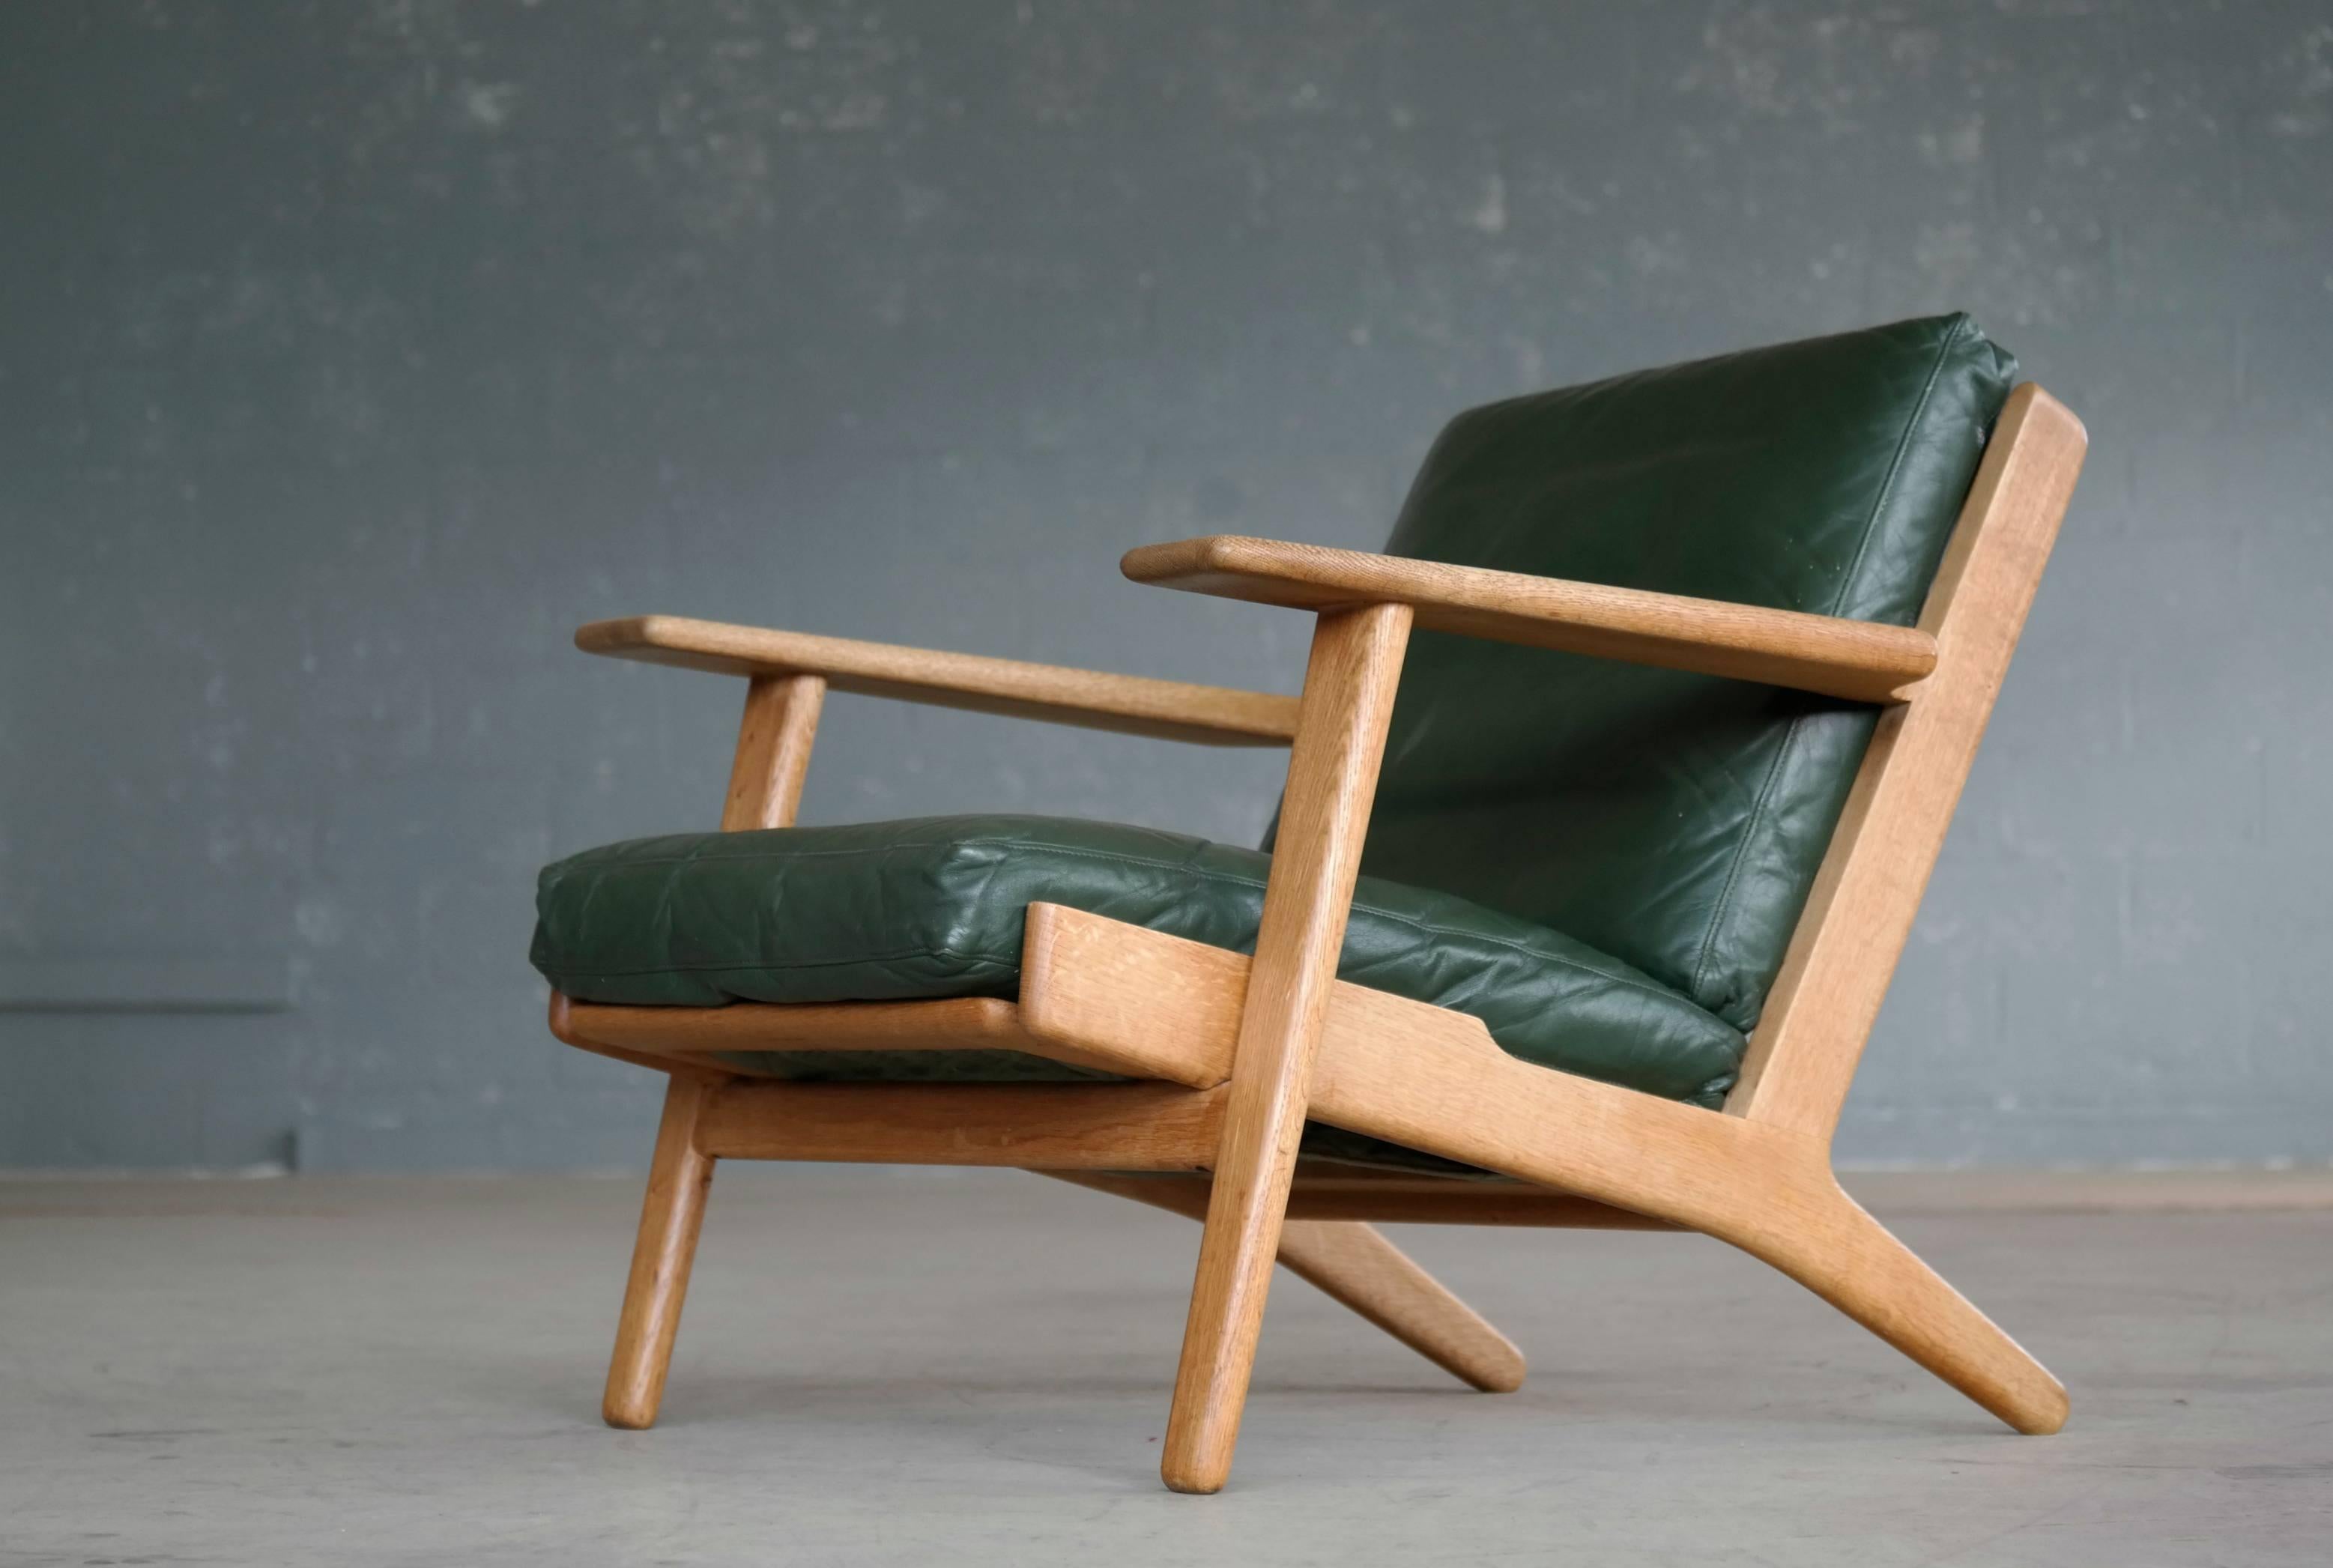 Mid-20th Century Hans Wegner Low Back Lounge Chair Model GE290 for GETAMA Oak and Green Leather